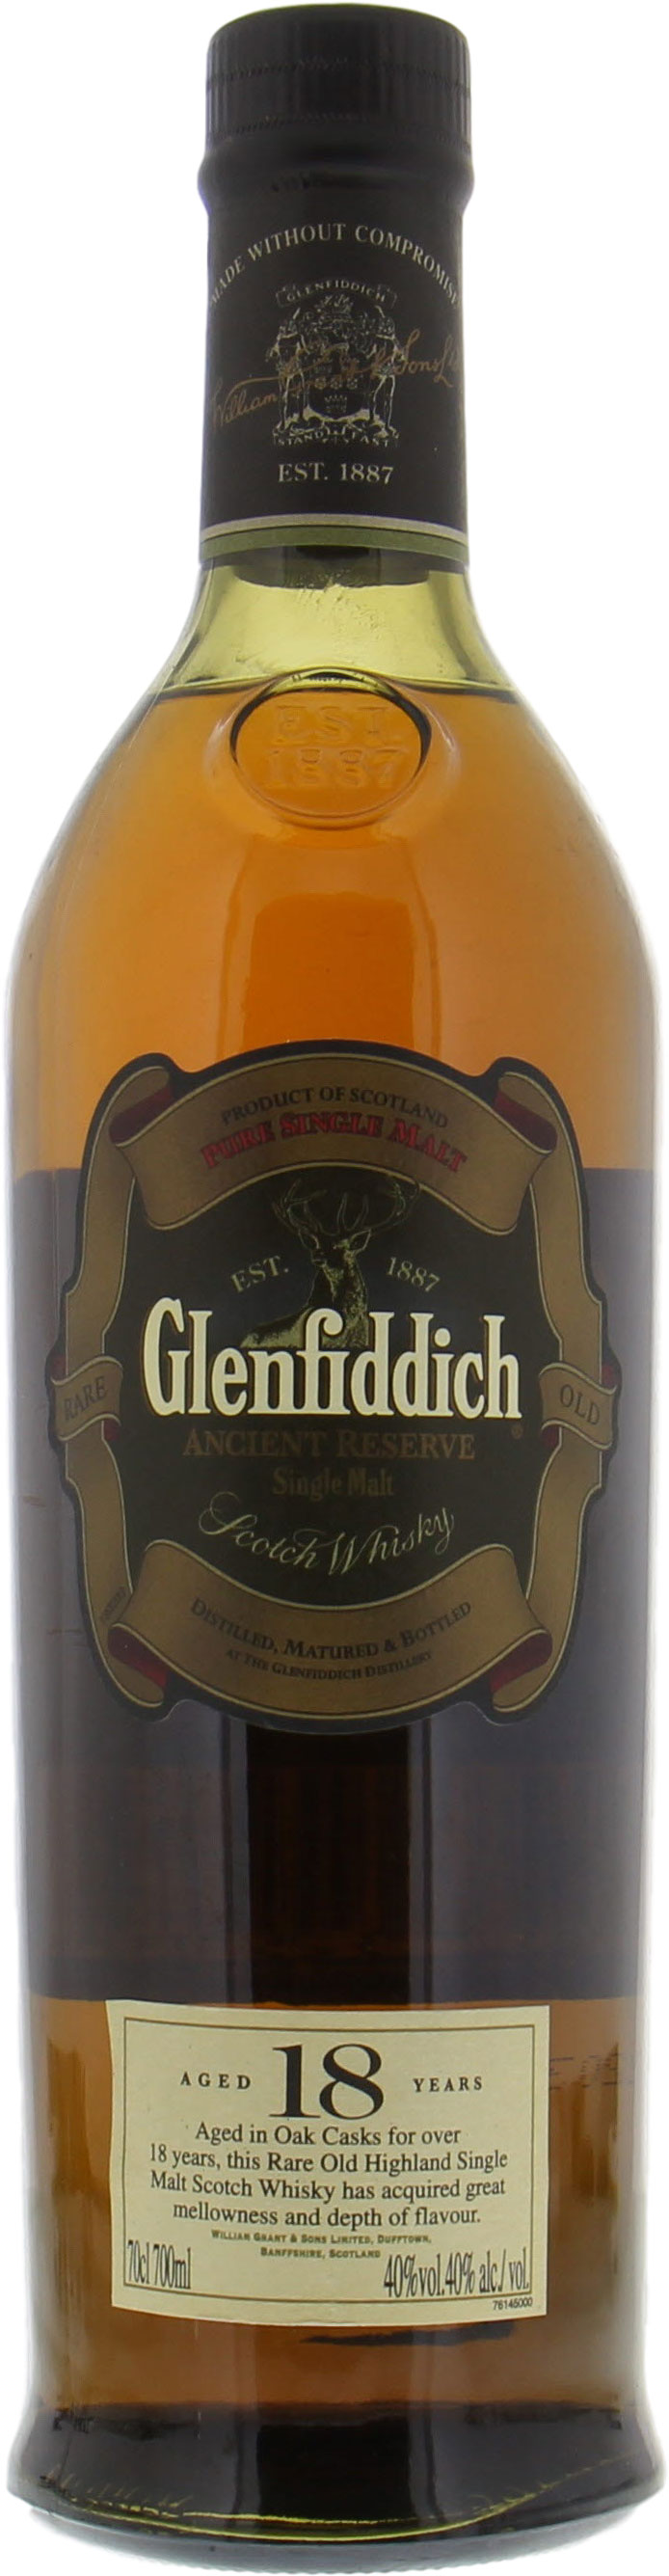 Glenfiddich - 18 Years Ancient Reserve 40% NV No Original Container Included!